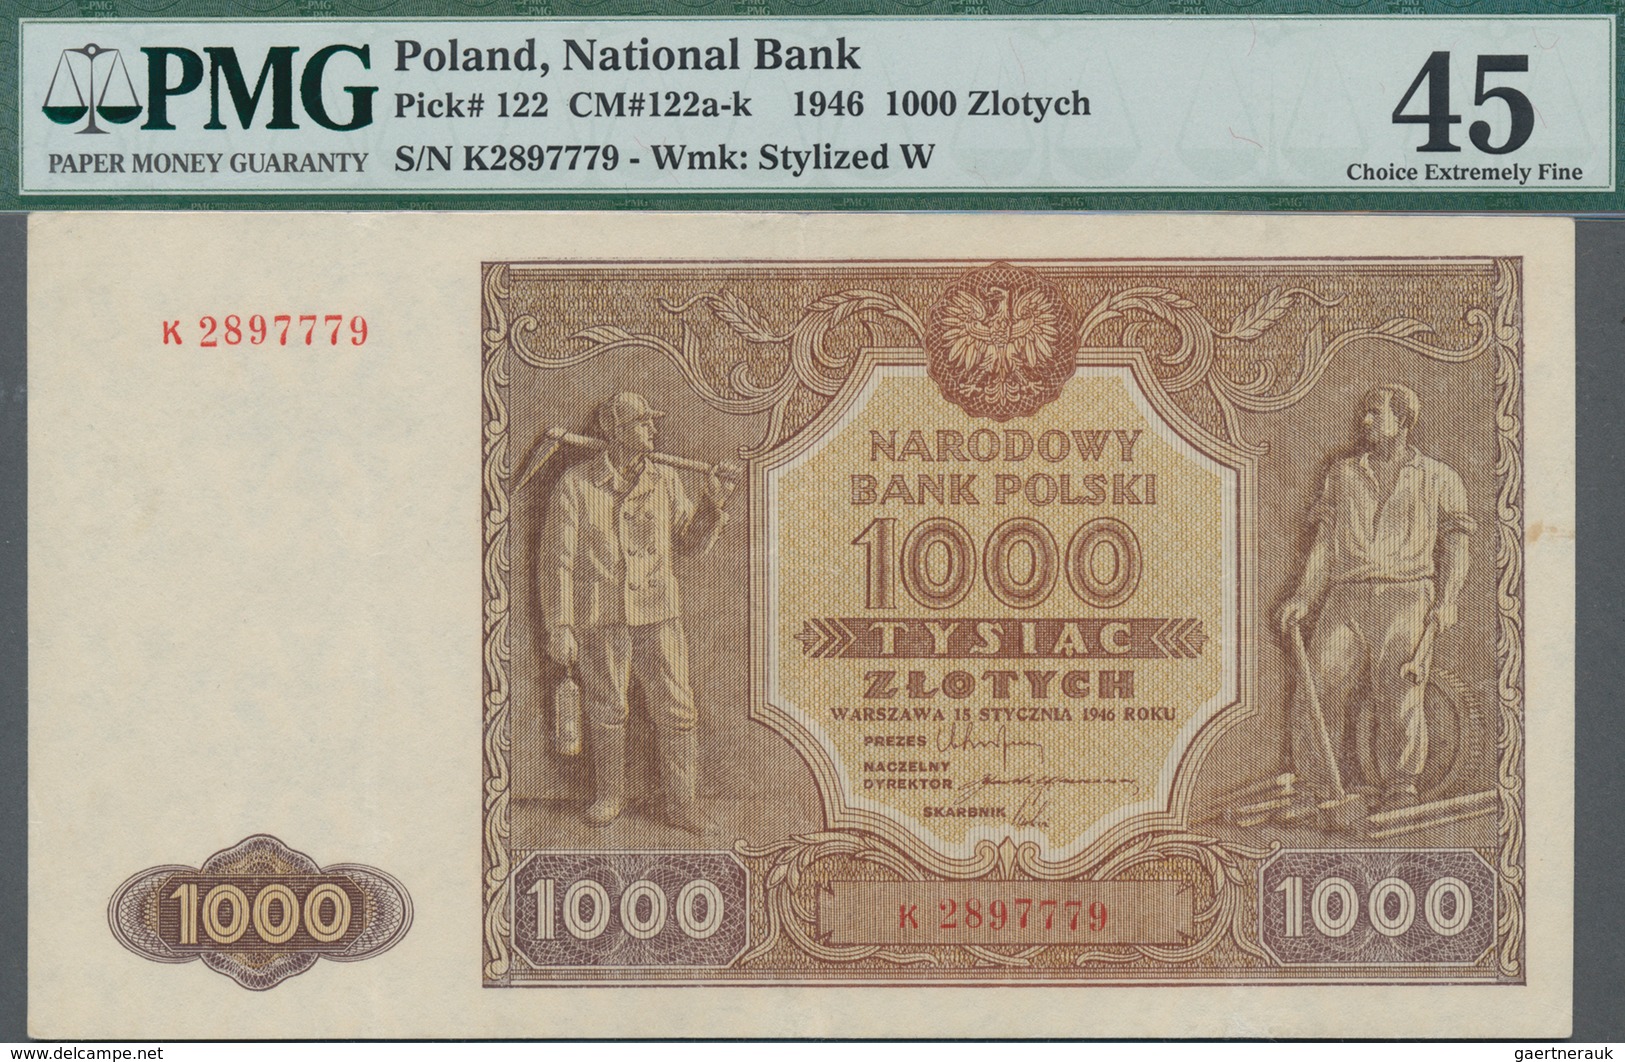 Poland / Polen: 1000 Zlotych 1946, P.122, Serial Number K2897779, PMG Graded 45 Choice Extremely Fin - Polen